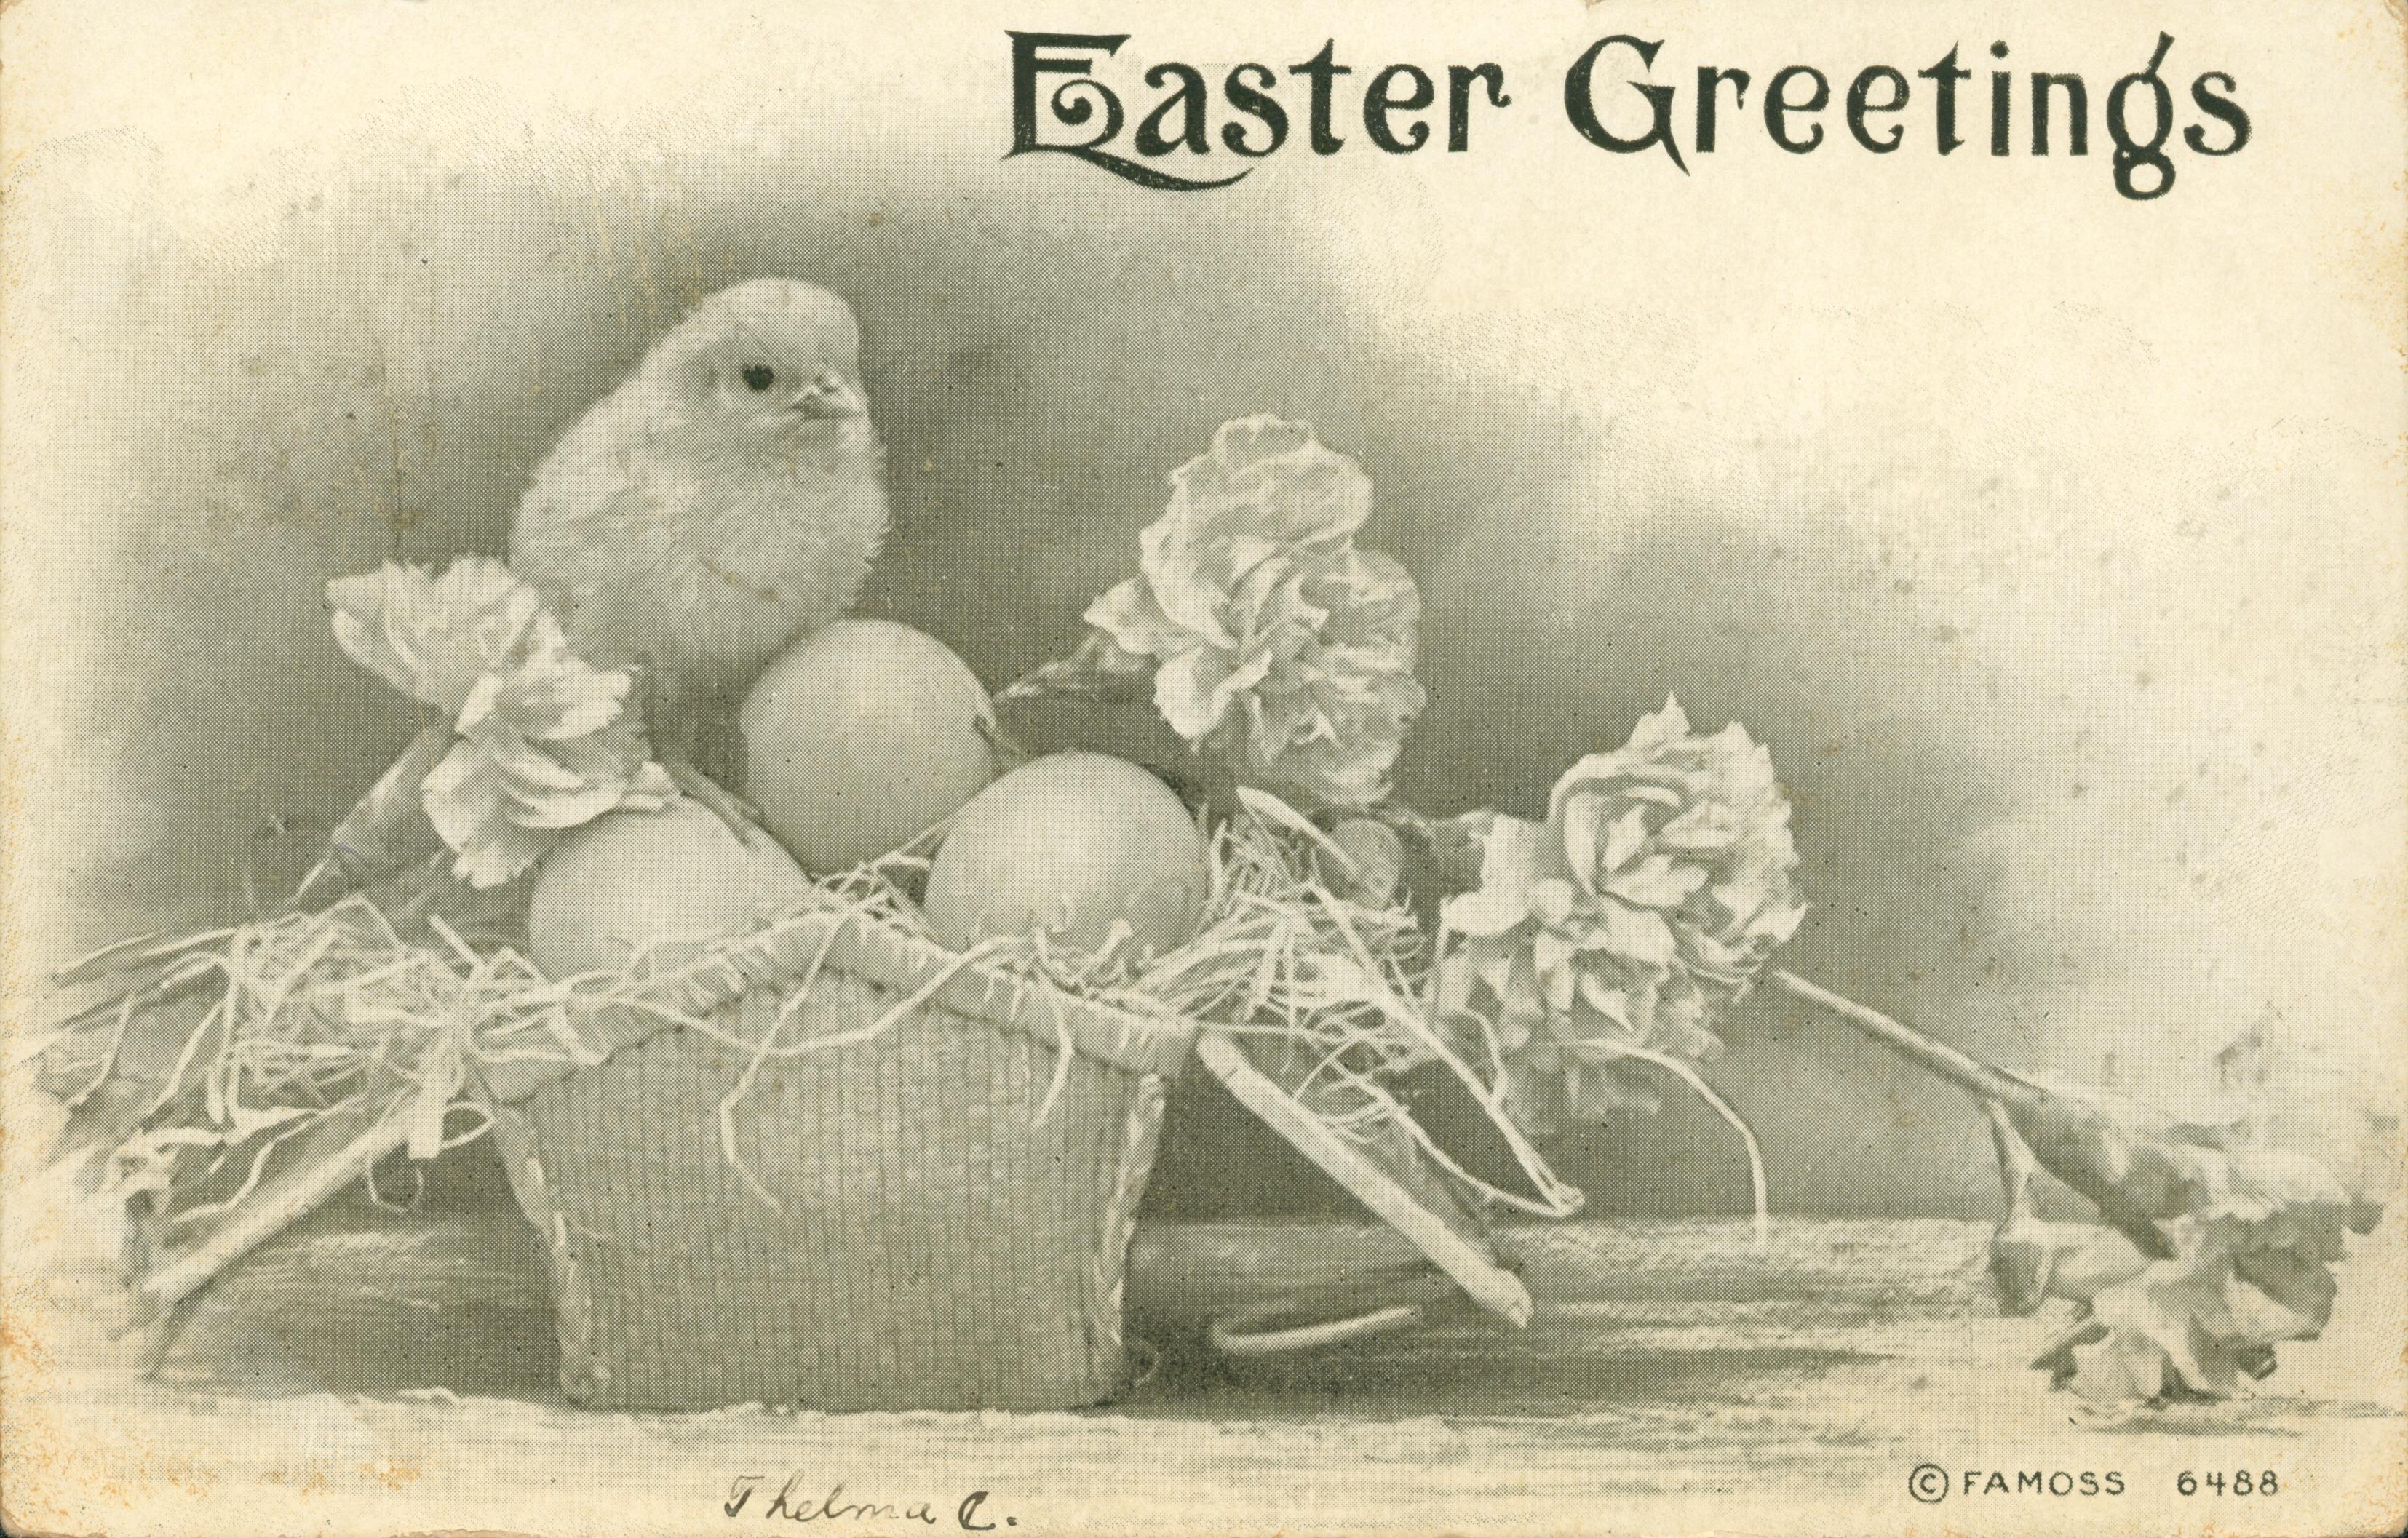 A chick on top of a basket of eggs and flowers.